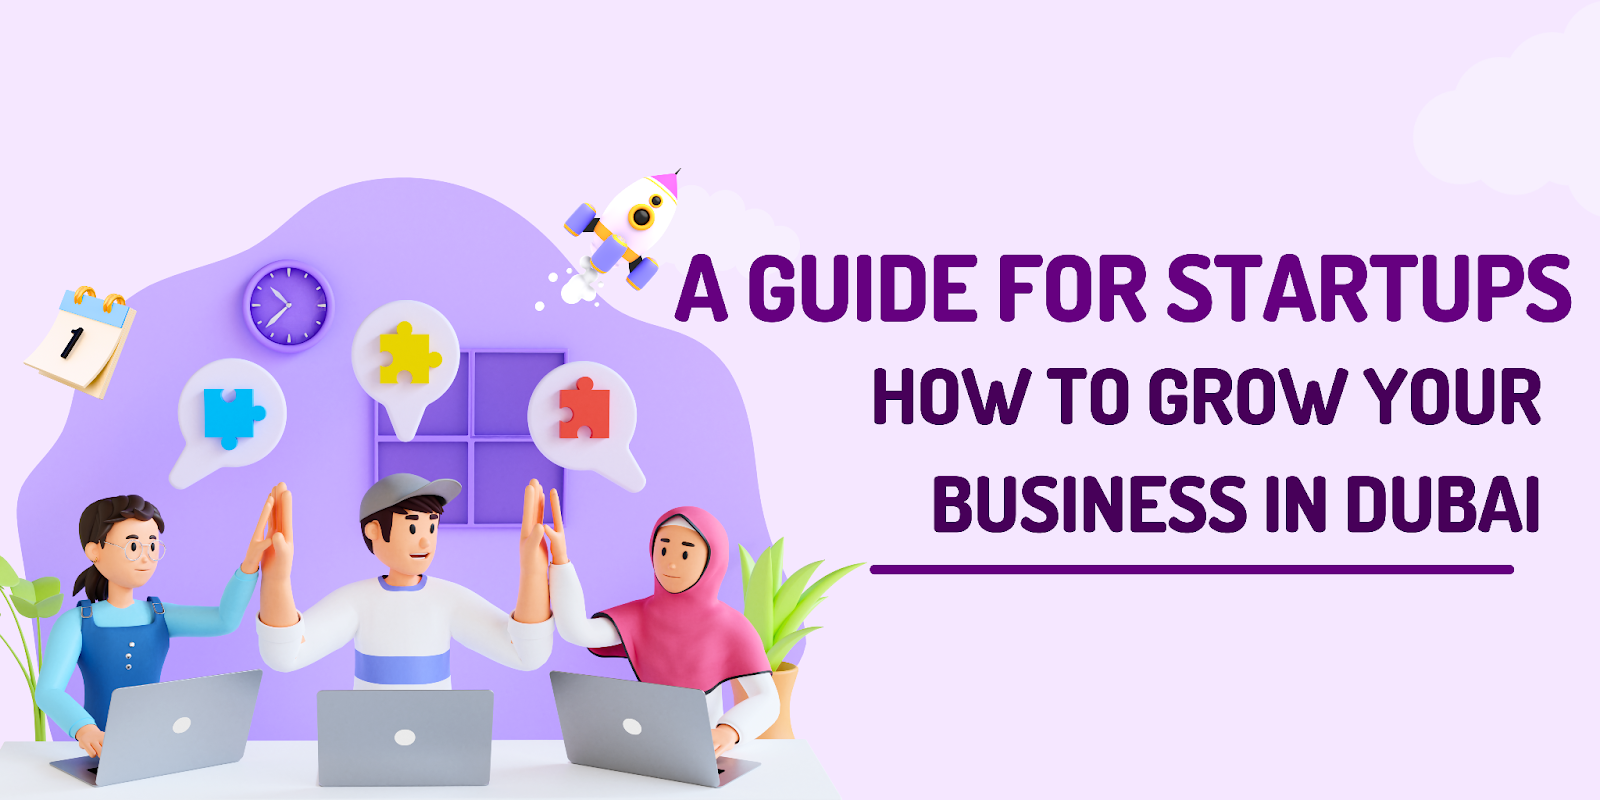 A guide for startups in Dubai on how to grow their businesses
